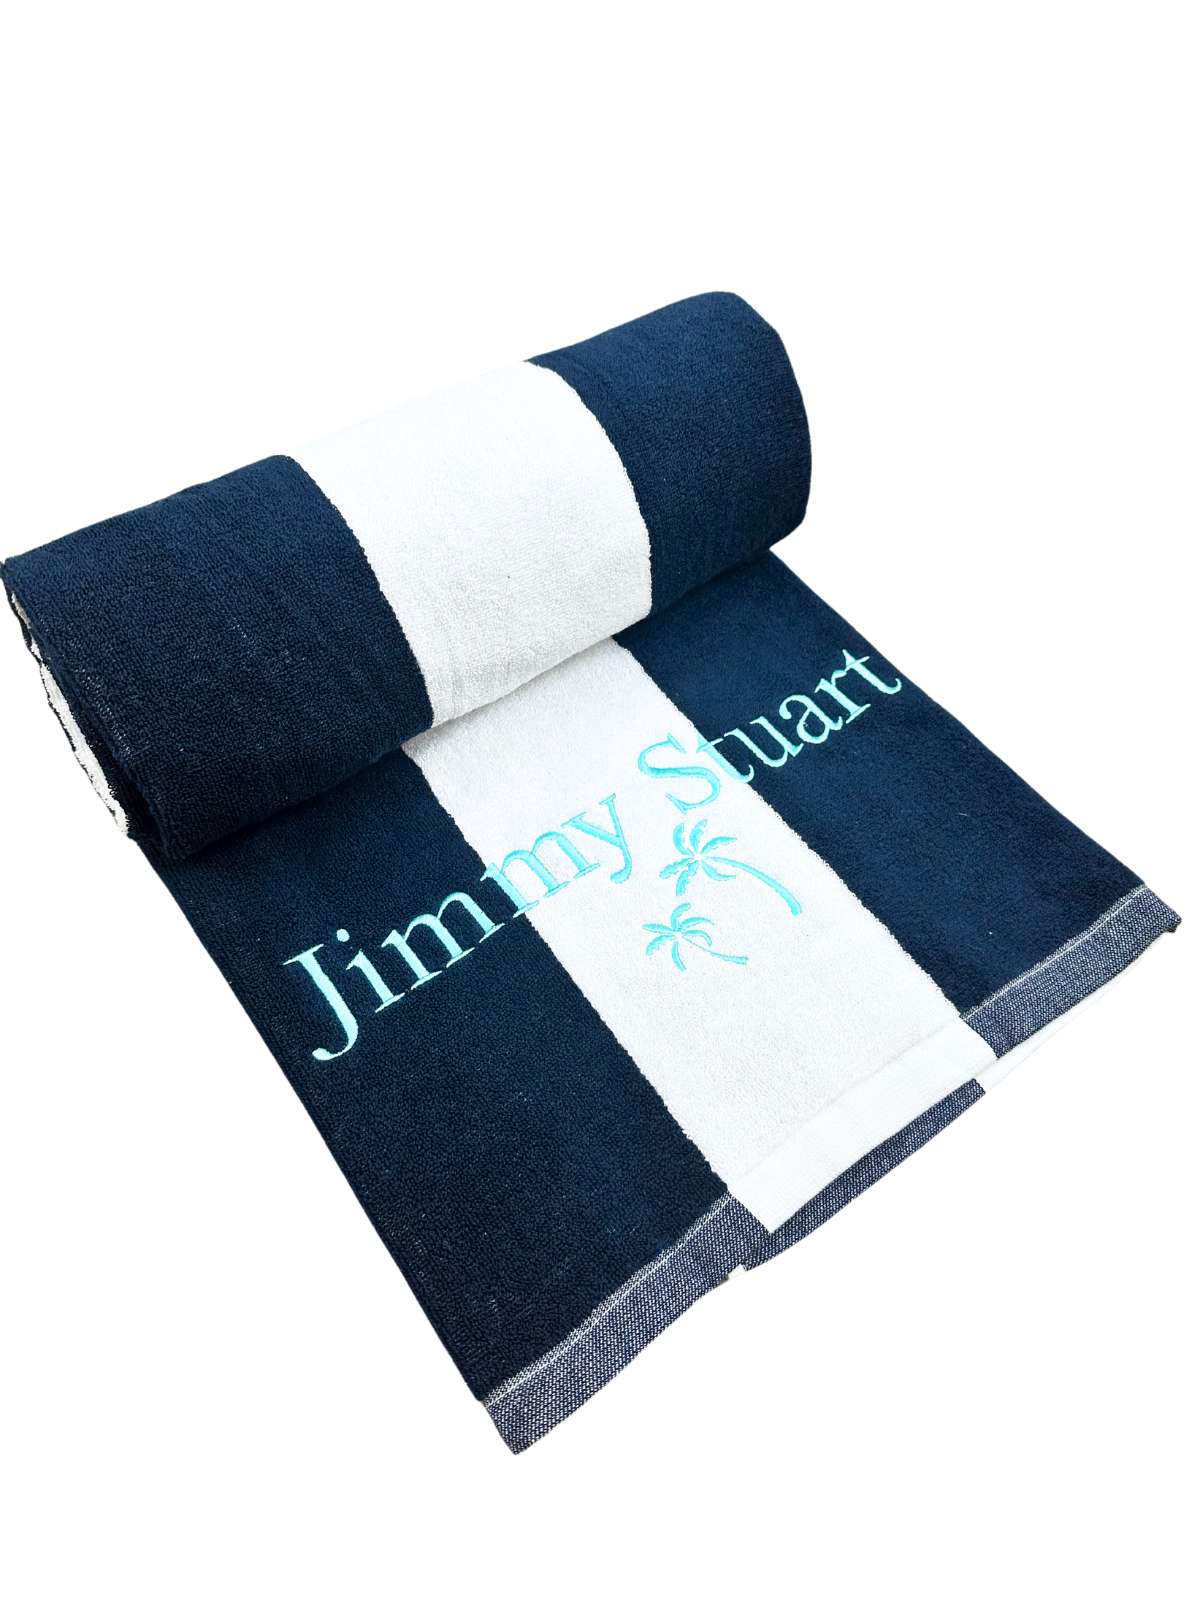 Navy and White Striped Towel